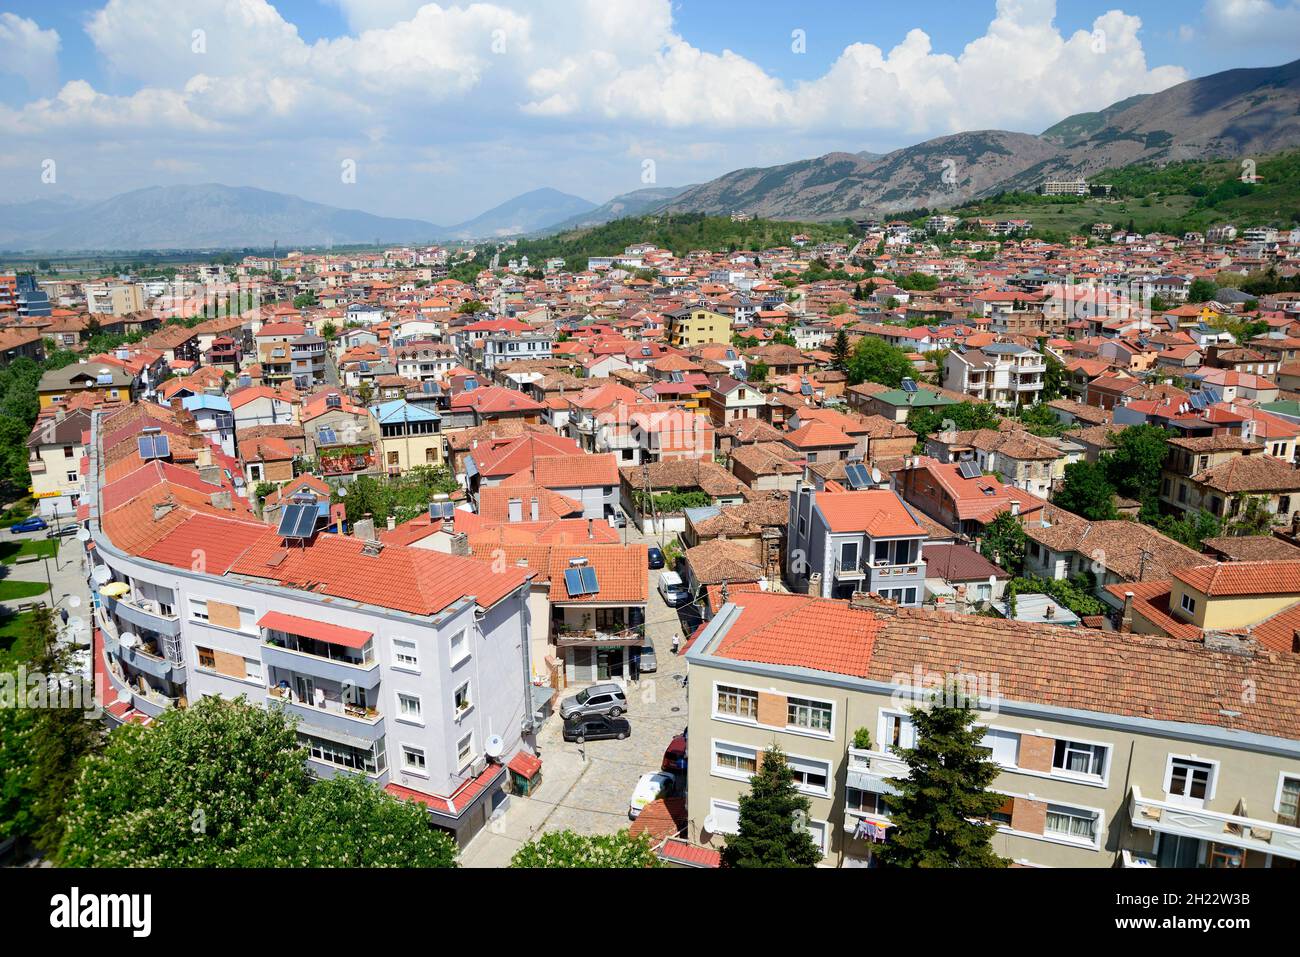 View from the Red Tower, City Centre, Korca, Korca, Albania Stock Photo